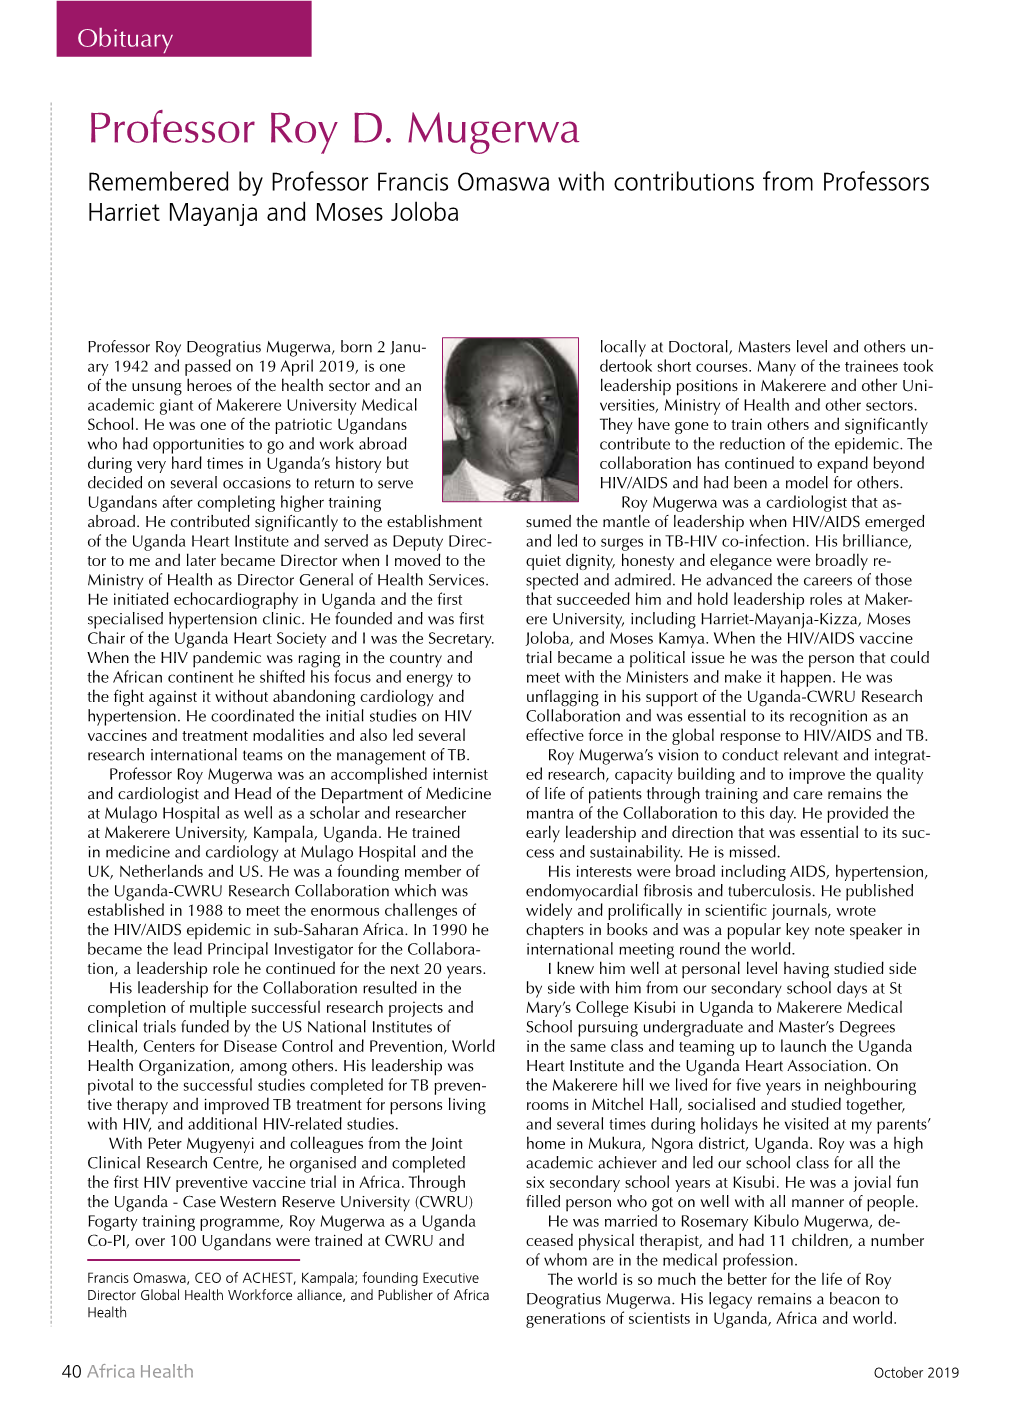 Professor Roy D. Mugerwa Remembered by Professor Francis Omaswa with Contributions from Professors Harriet Mayanja and Moses Joloba